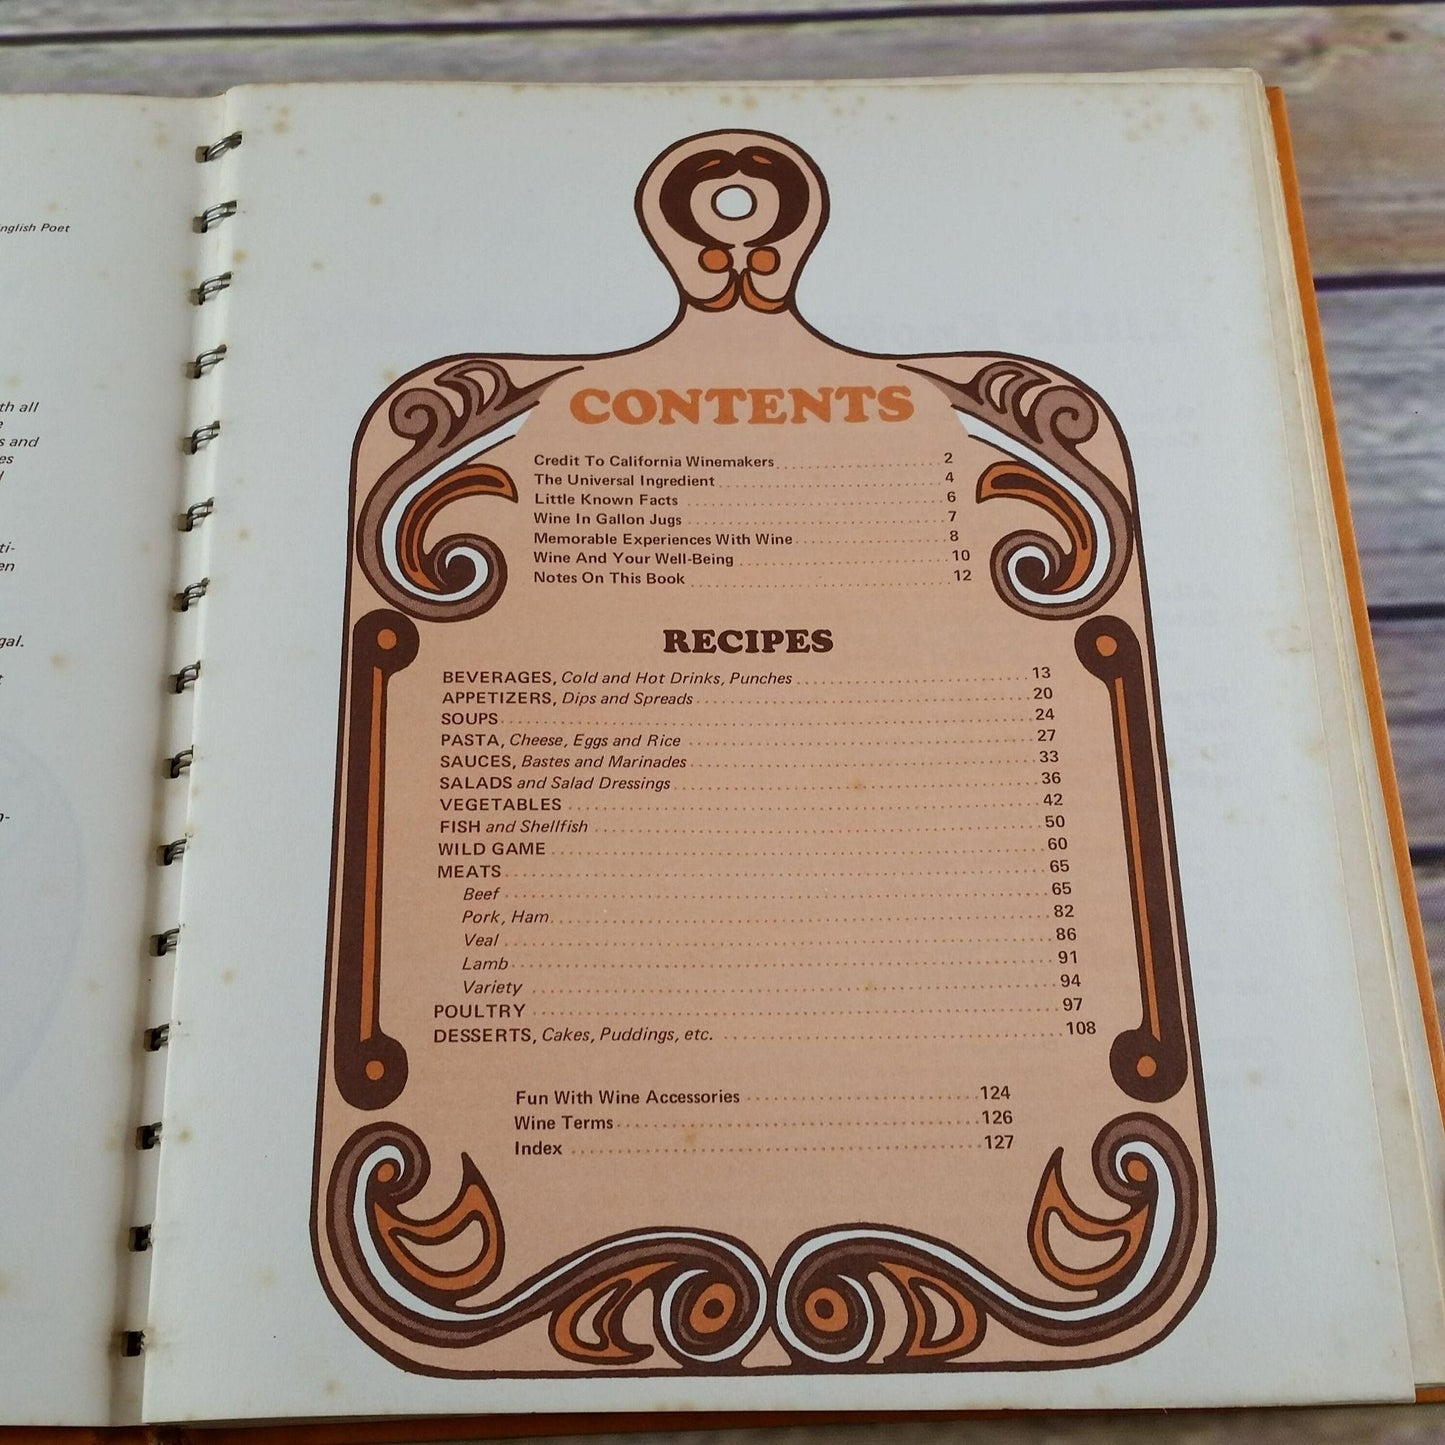 Vintage California Cookbook Easy Recipes California Winemakers 1970 Spiral Bound Hardcover Cooking with Wine Recipes